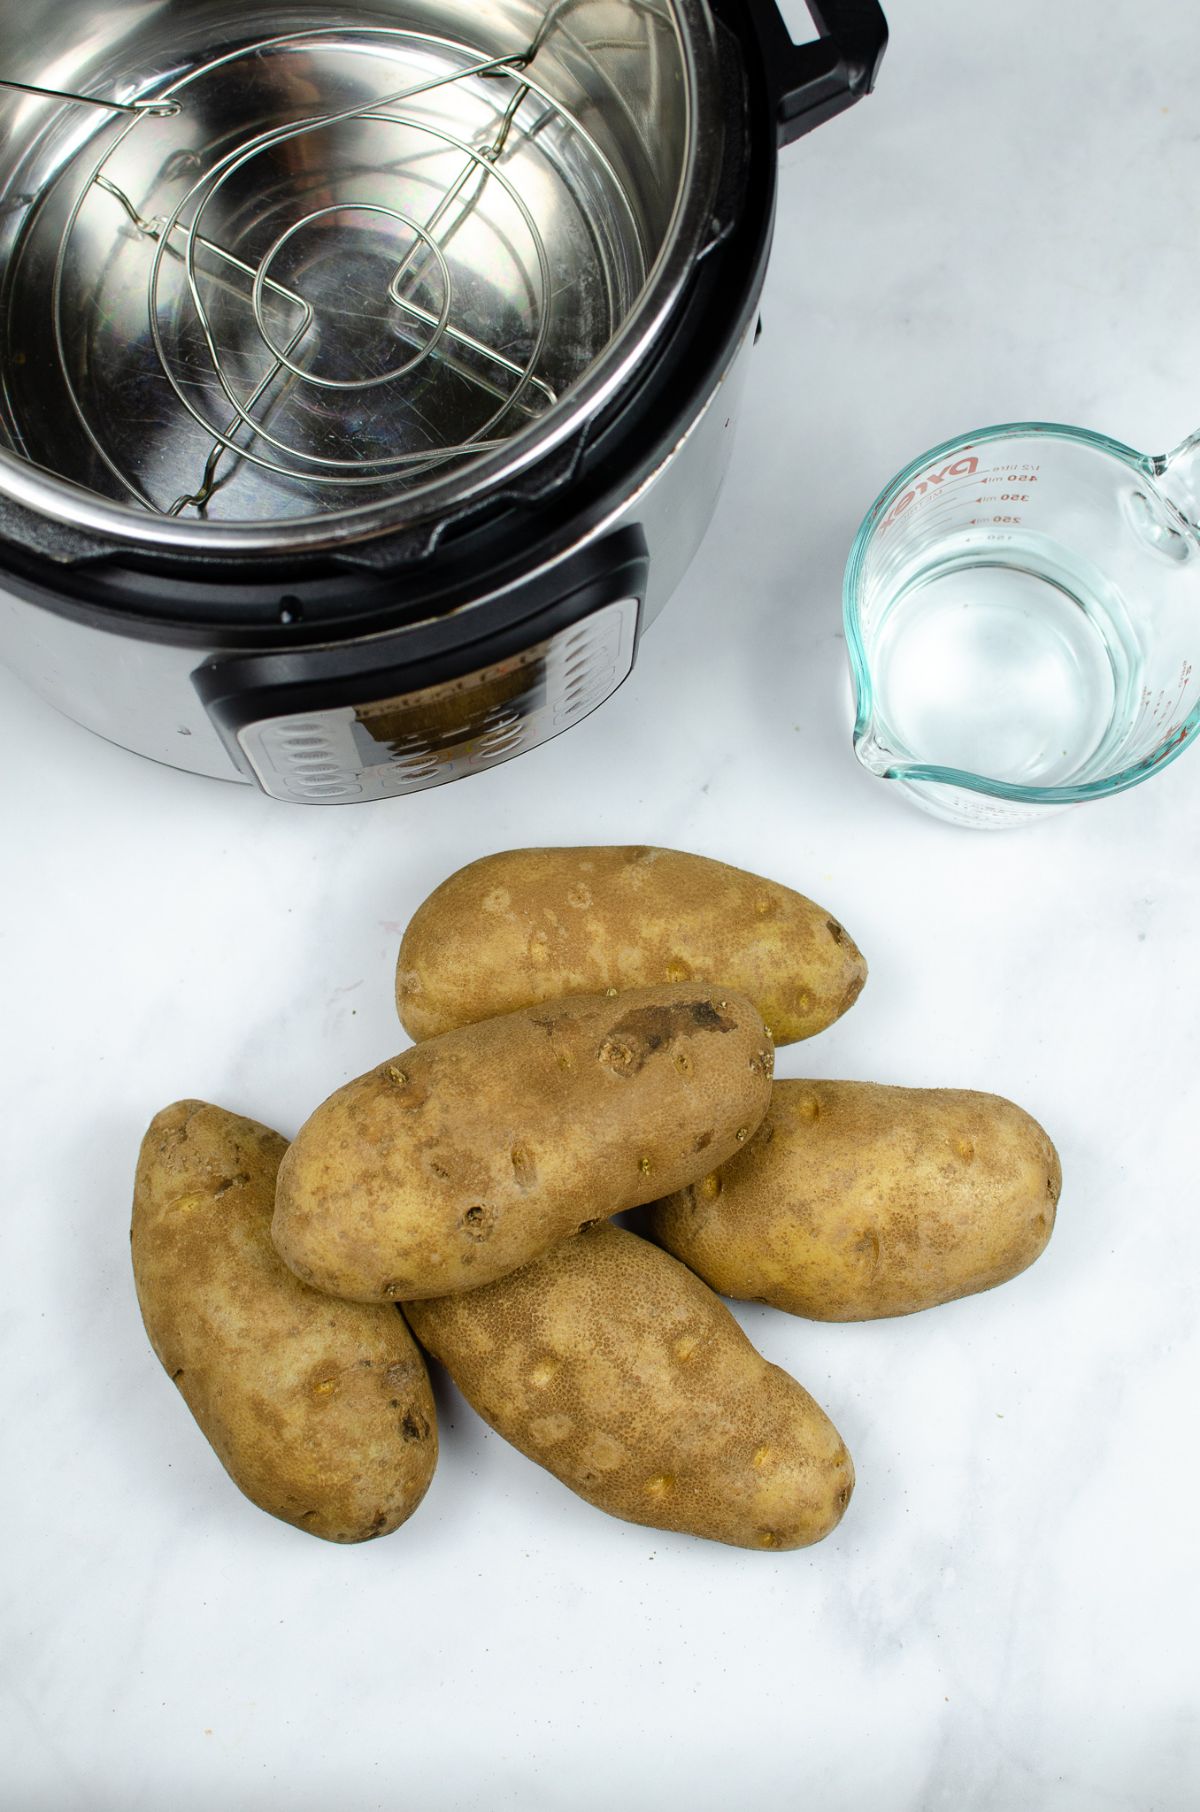 Raw potatoes, water, and instant pot used to make Instant Pot Baked Potatoes.